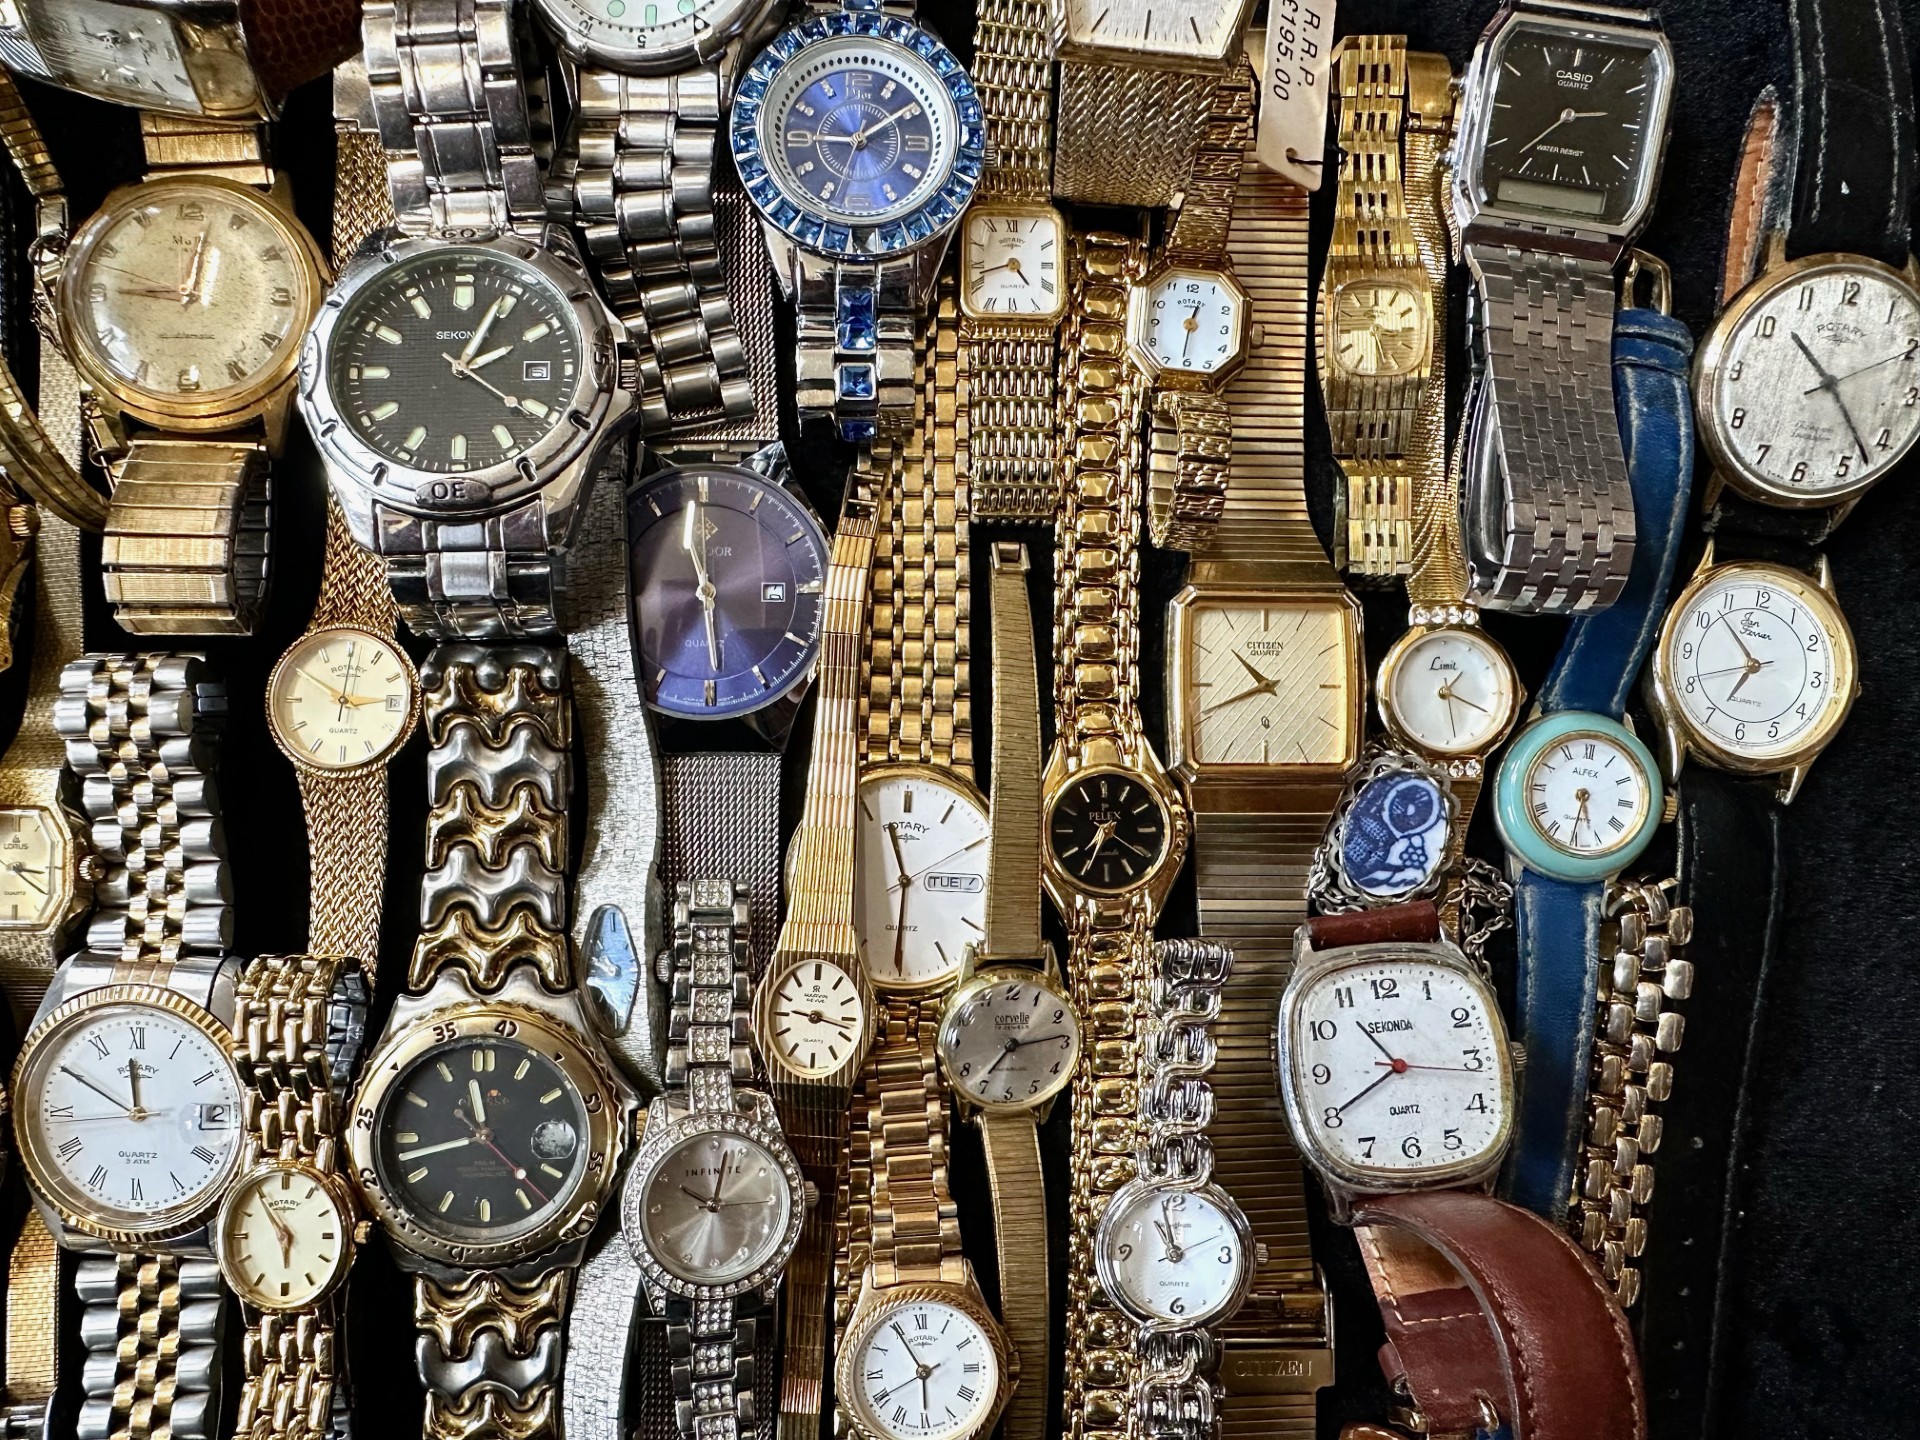 Collection of Ladies & Gentleman's Wristwatches, makes to include Rotary, Sekinda, Citizen, - Image 2 of 4